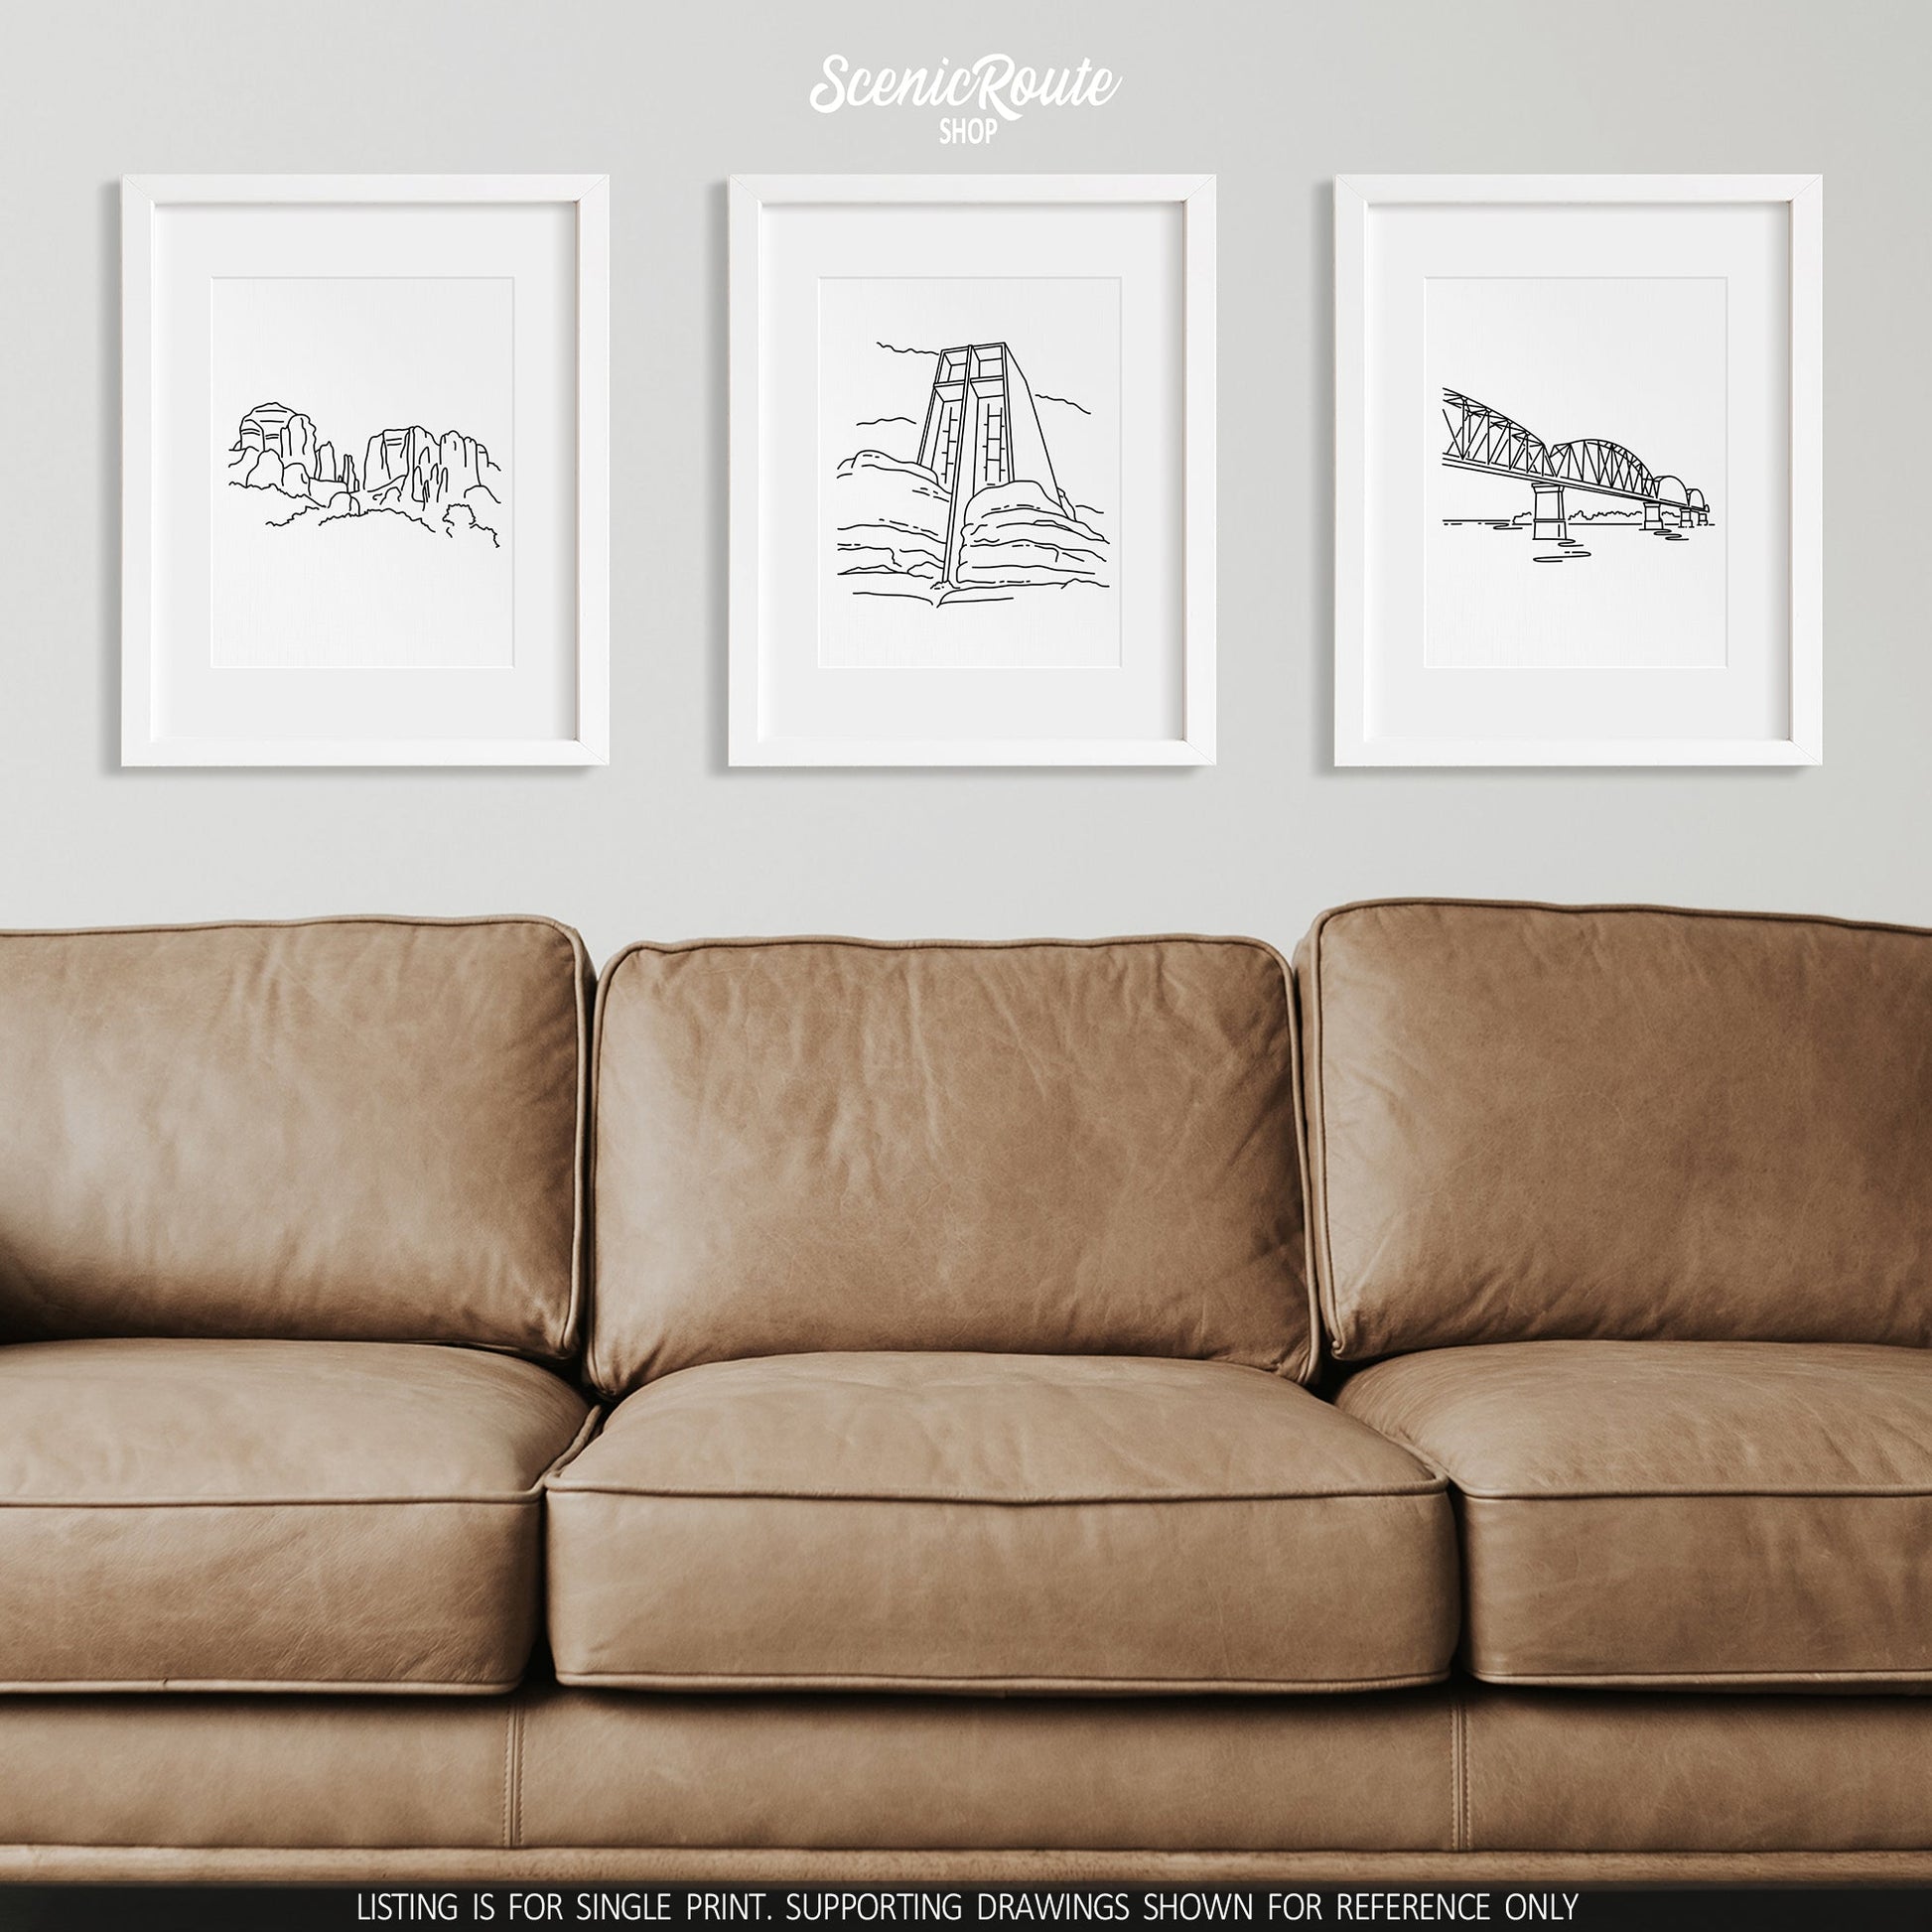 A group of three framed drawings on a wall above a couch. The line art drawings include Cathedral Rock, Chapel of the Holy Cross, and Big Four Bridge